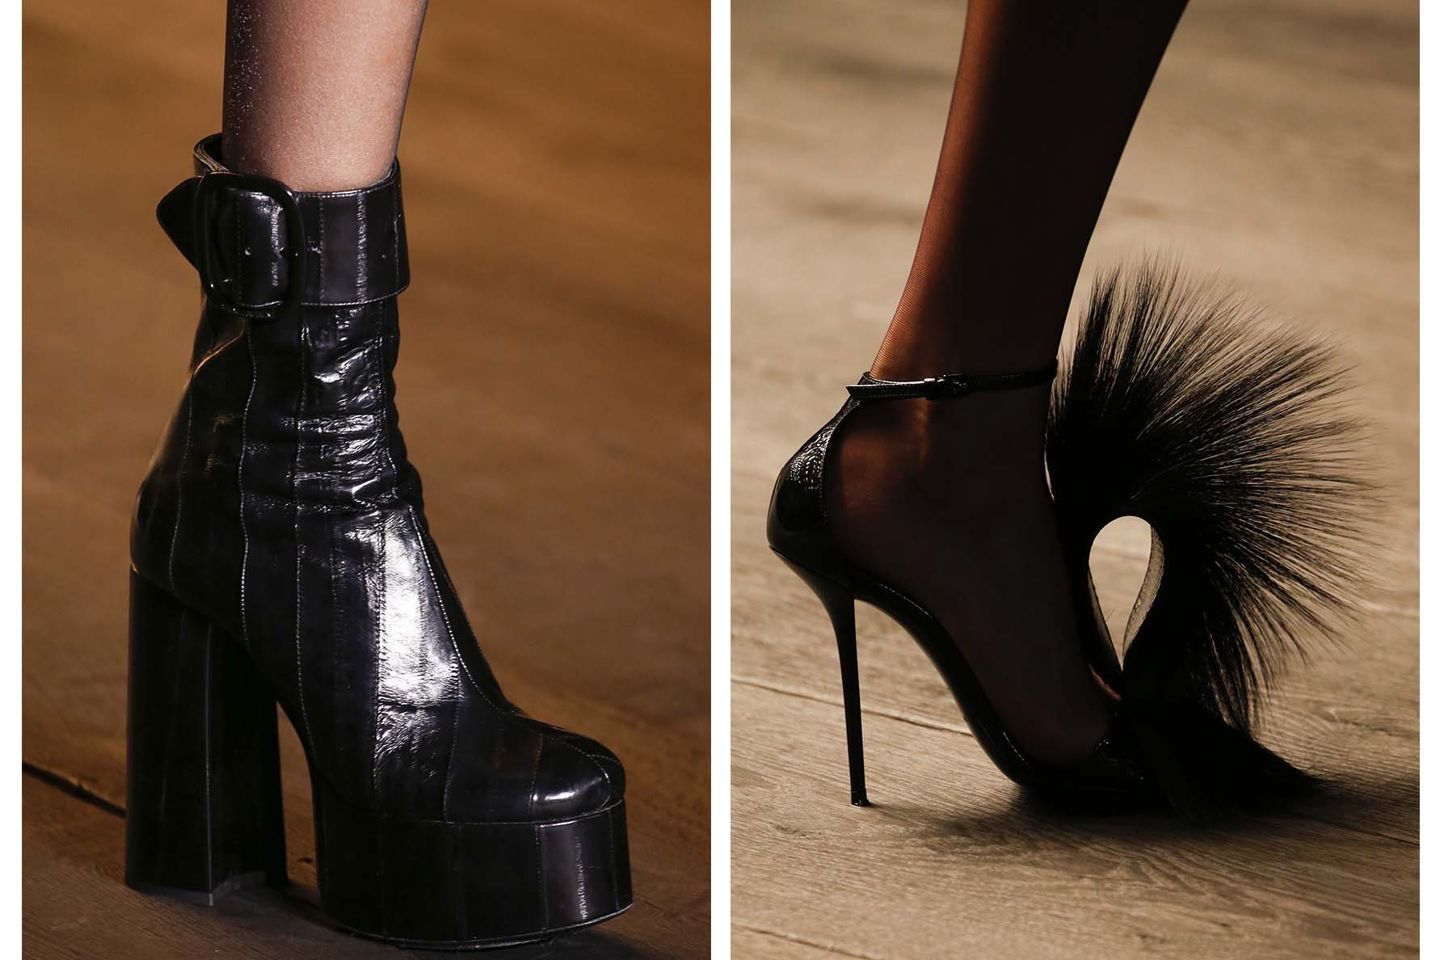 For Saint Laurent Autumn/Winter 2018 the shoes may all be black, but the styles range from the assertive to the whimsical (Photo: INDIGITAL.TV)